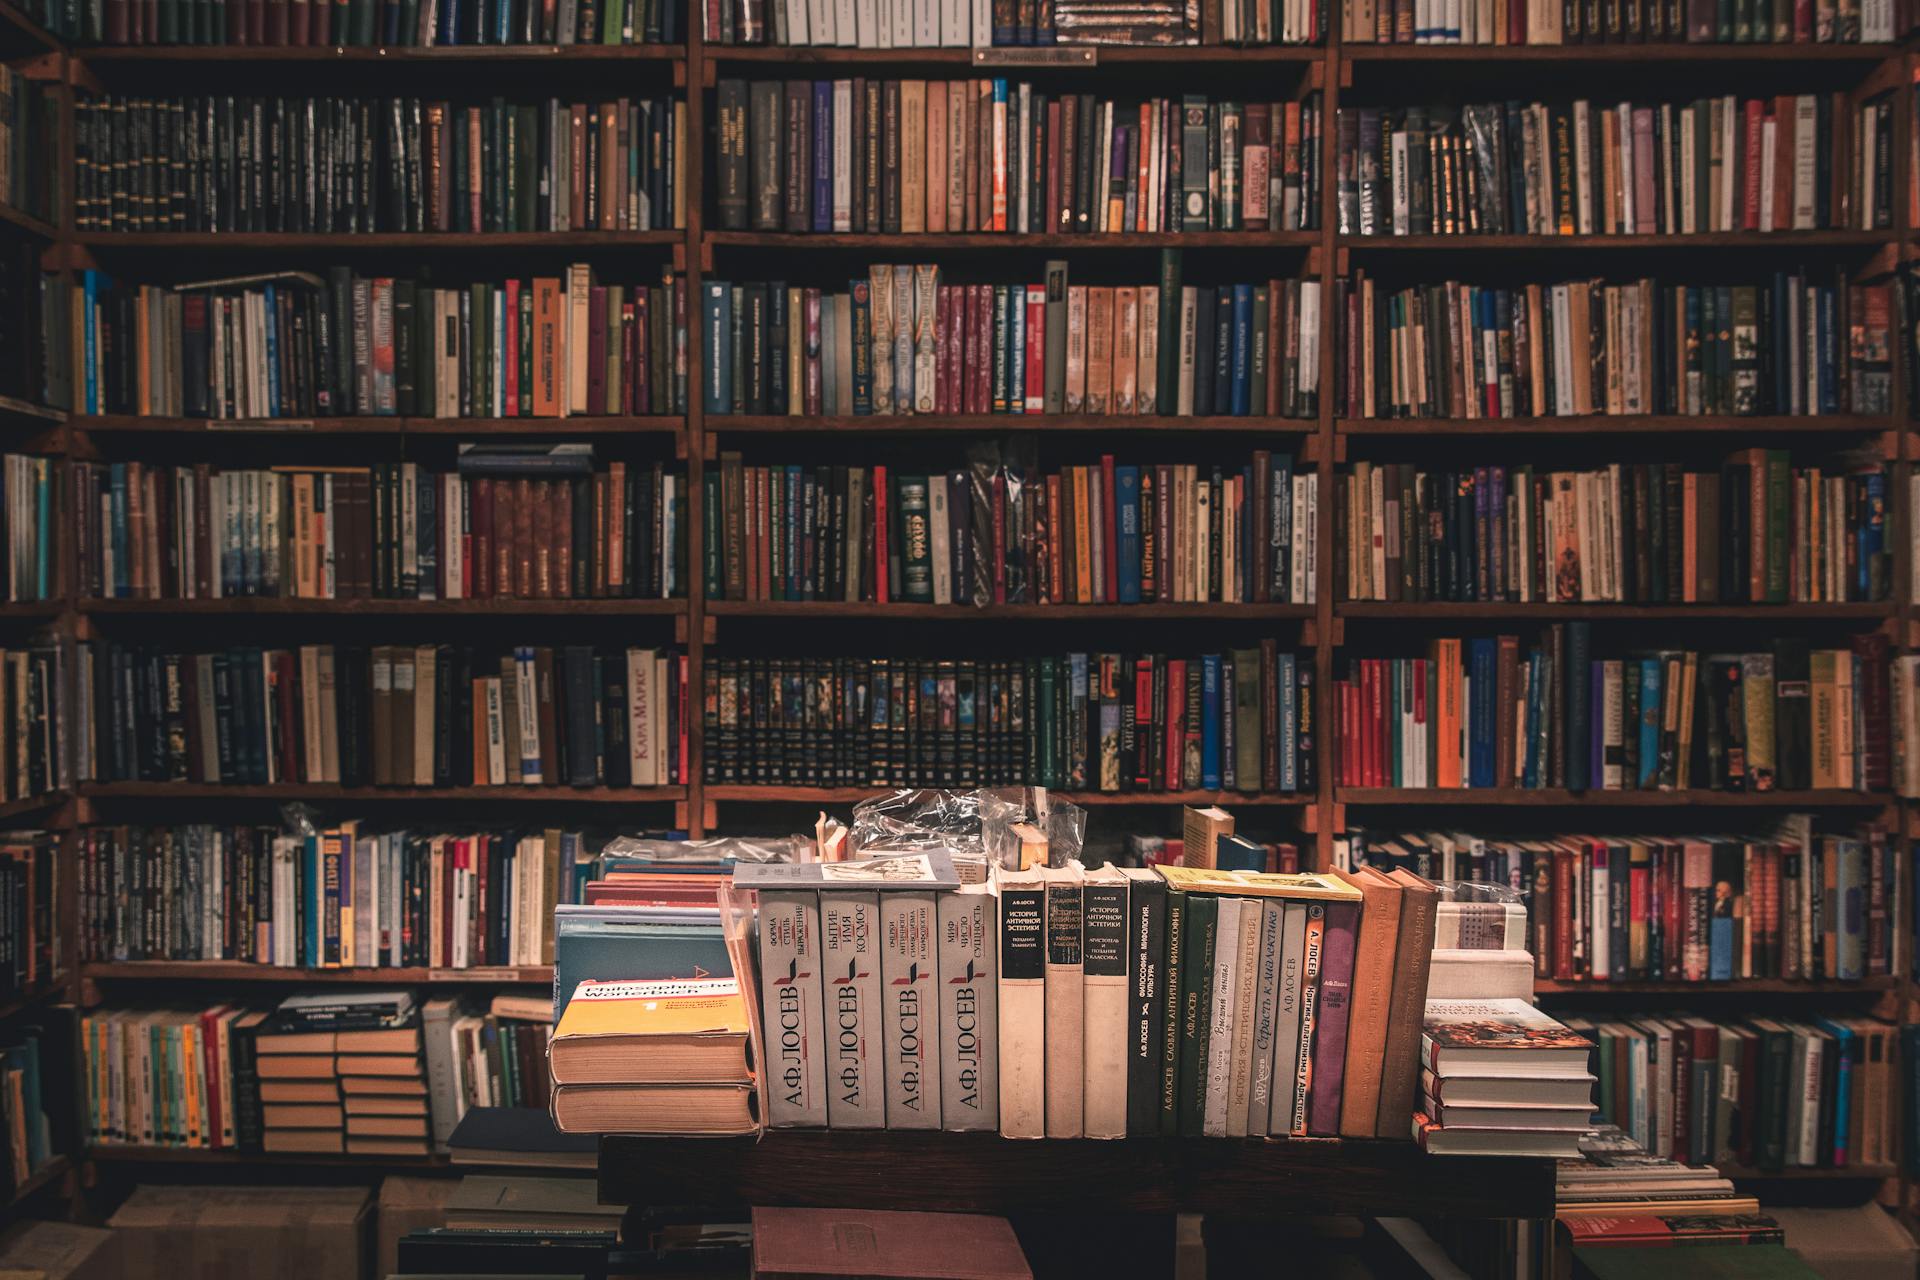 Bookshelves in a library | Source: Pexels